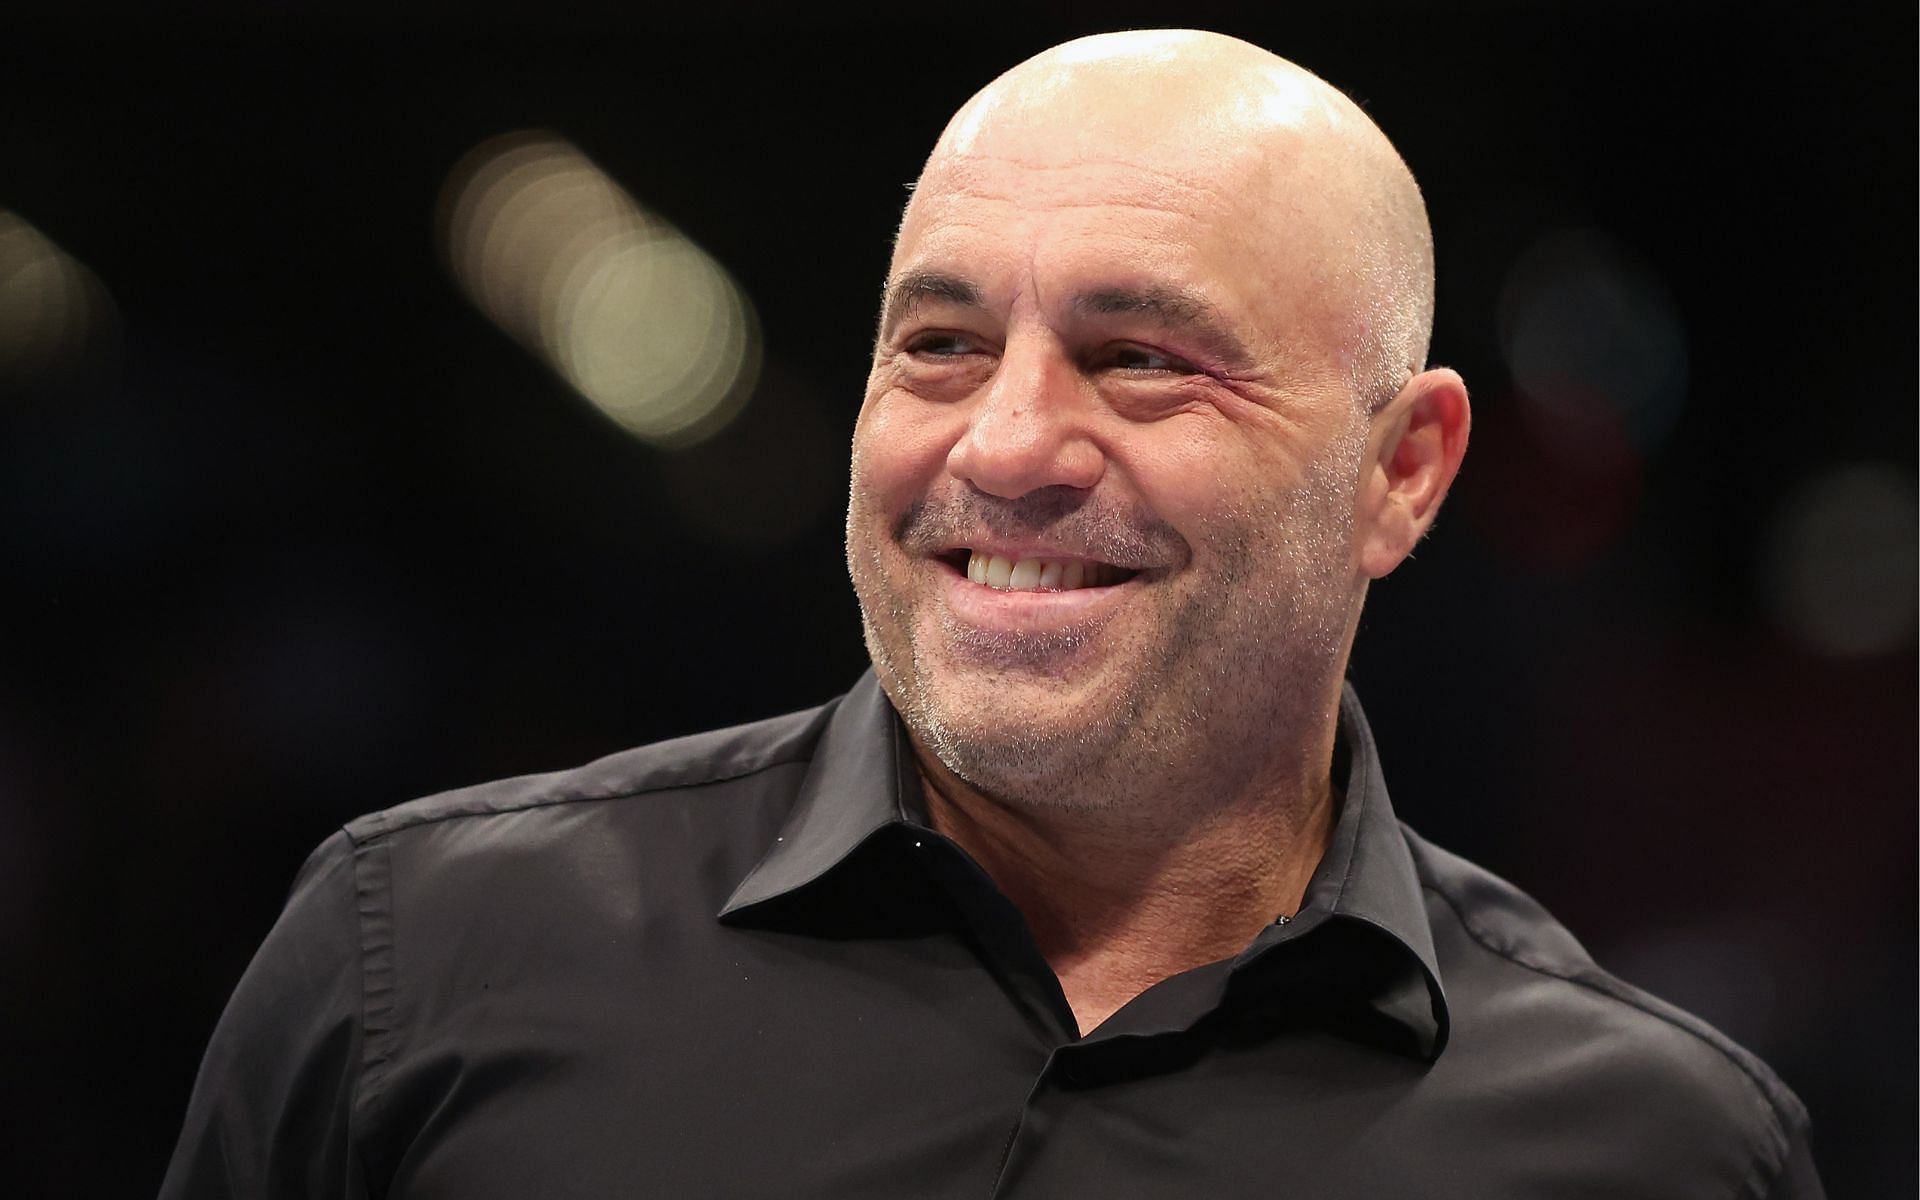 Veteran martial arts practitioner and podcast mogul Joe Rogan also happens to be an avid user of cannabis